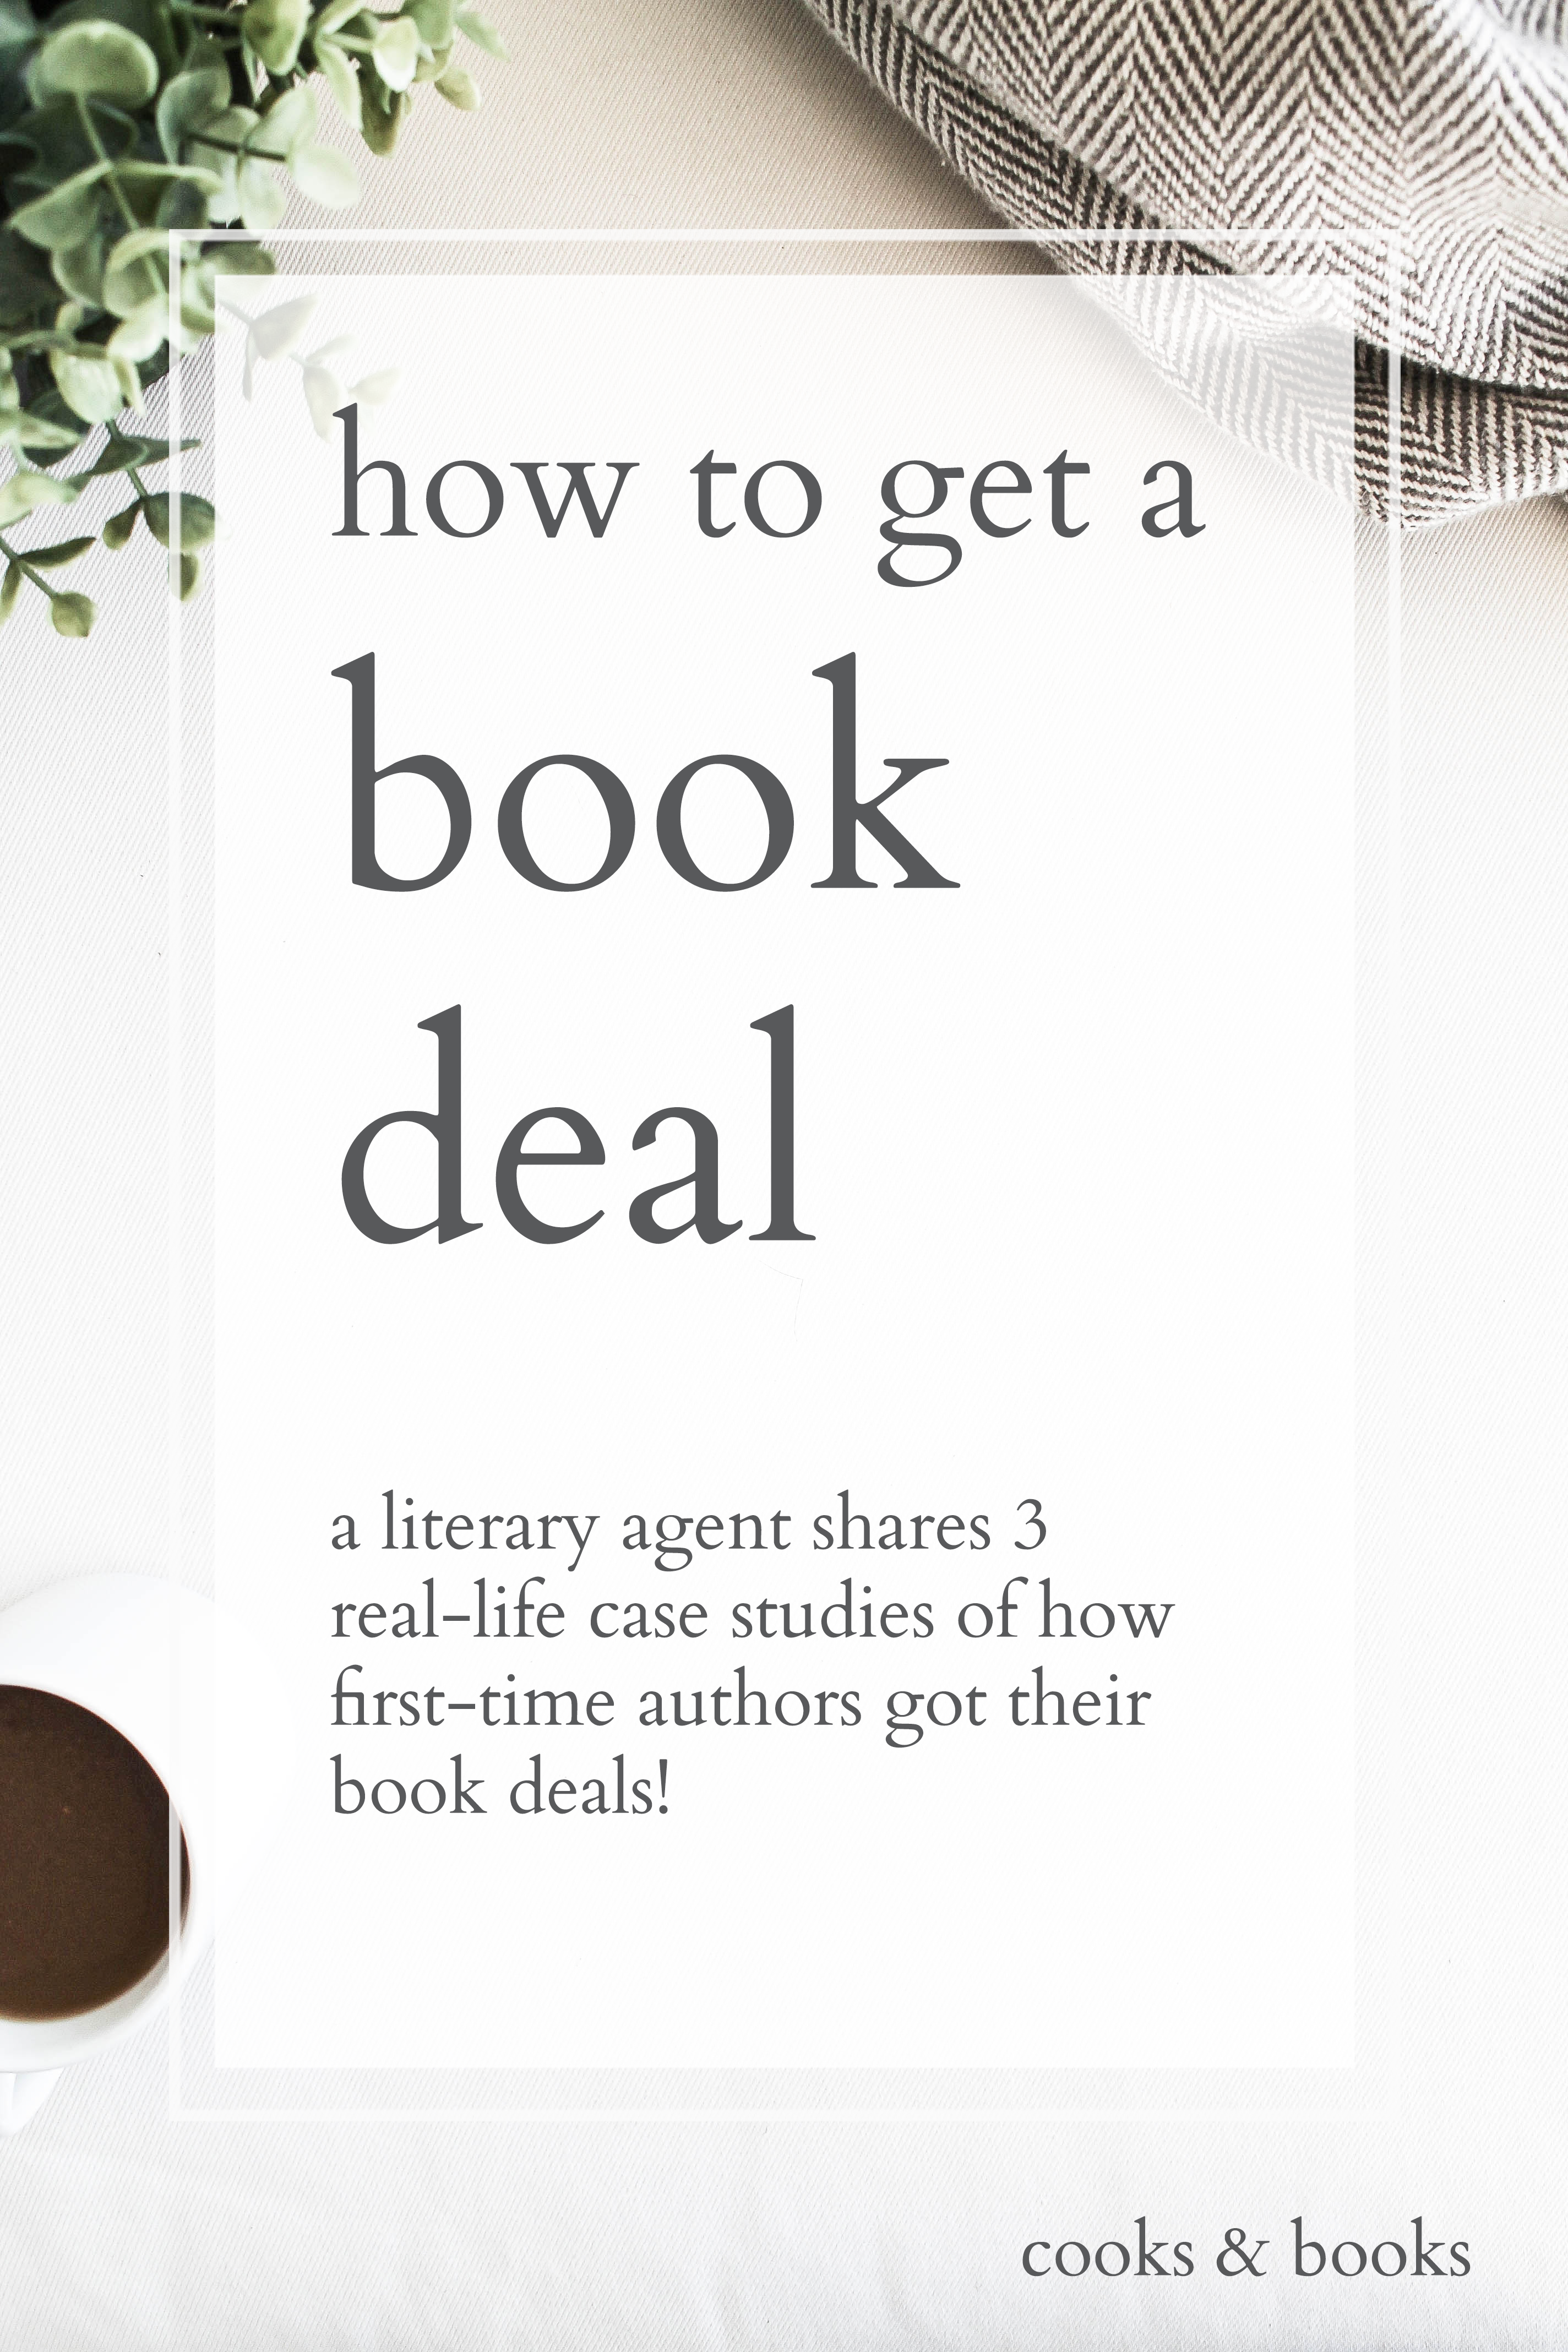 How to get a book deal